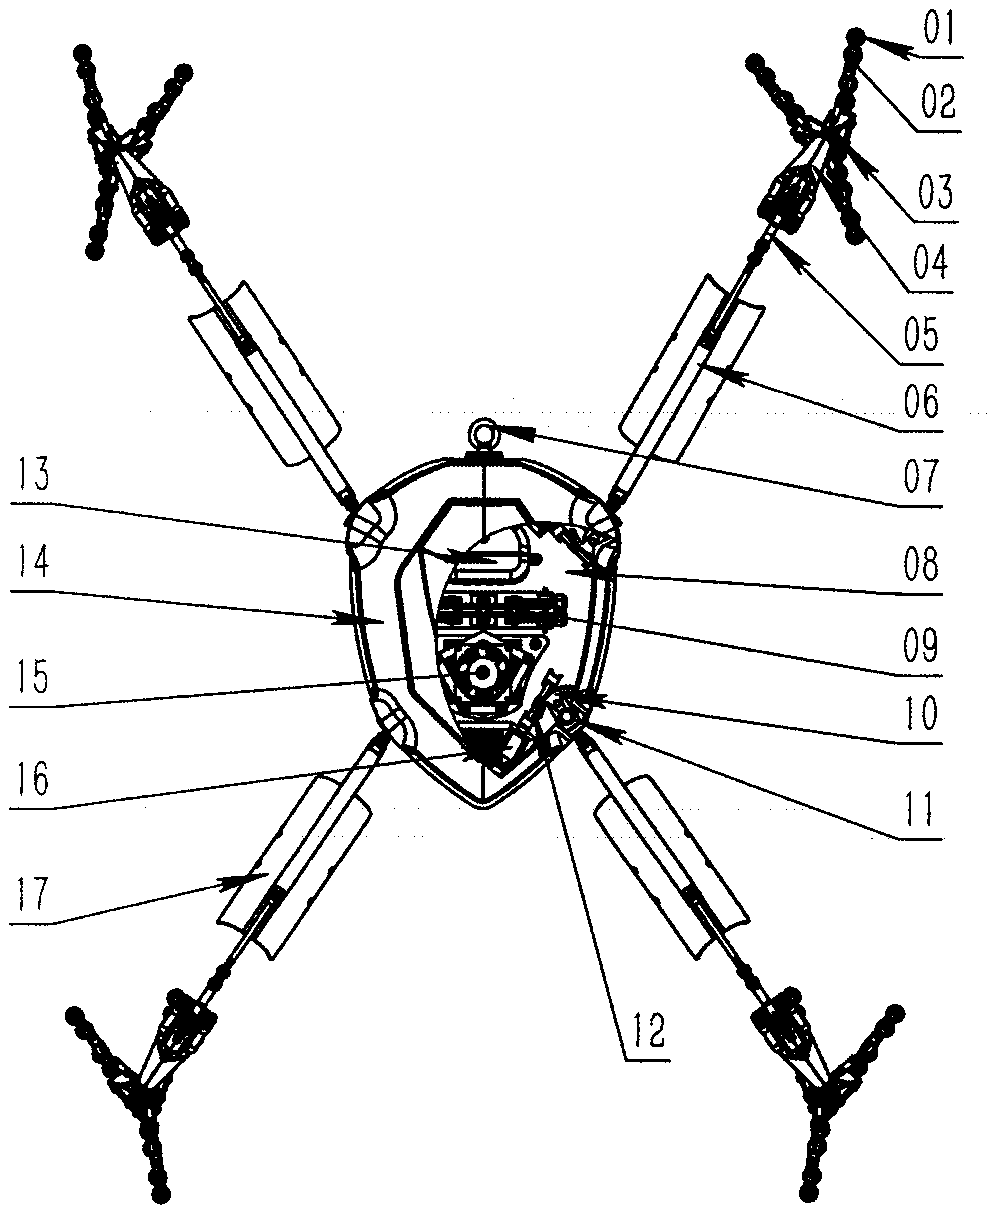 Mechanical structure design for independent multi-sucker climbing arm system of wall climbing robot